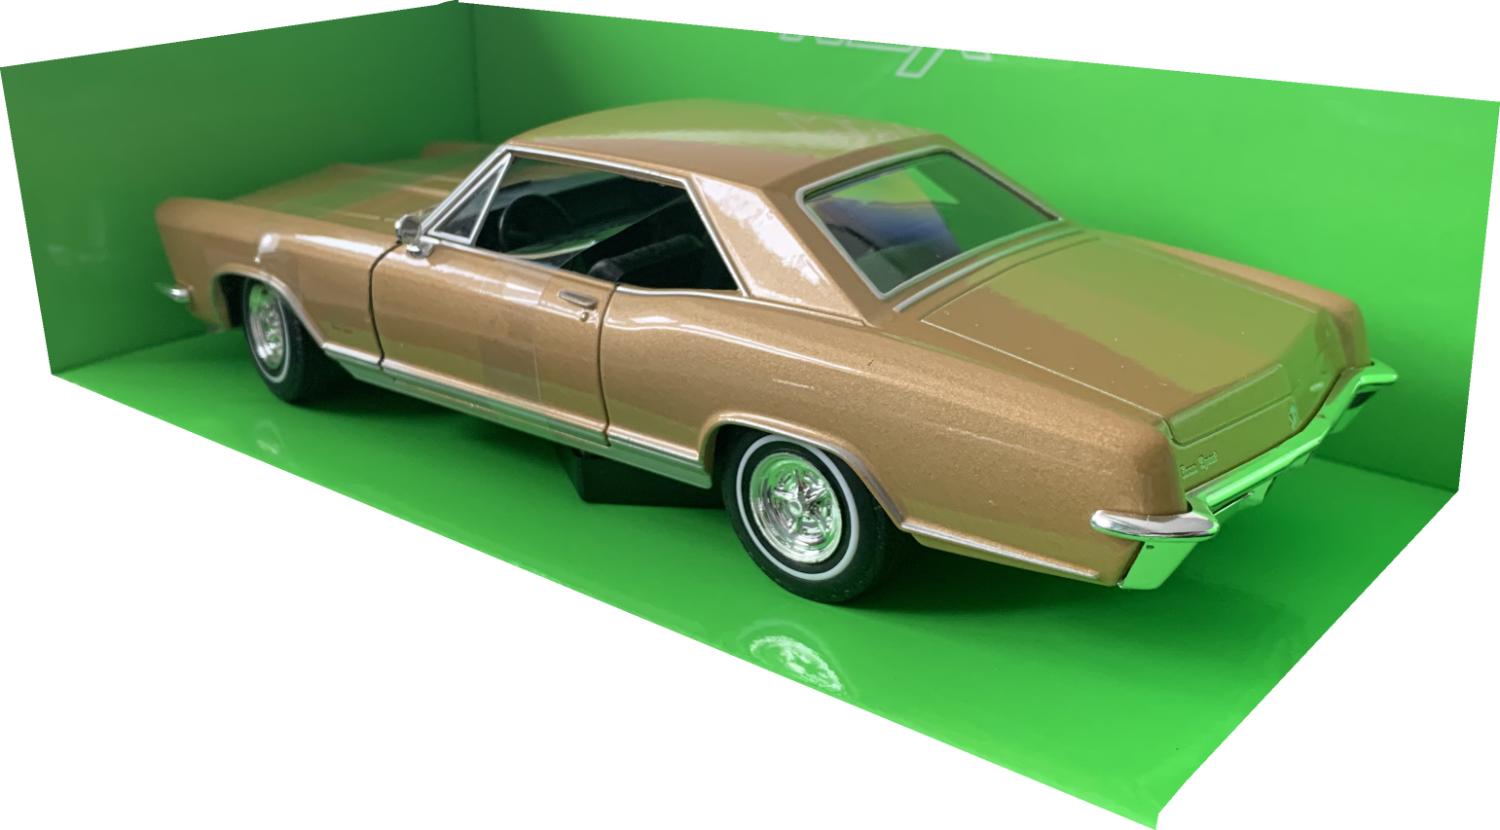 Buick Riviera Gran Sport 1965 in gold 1:24 scale model from Welly